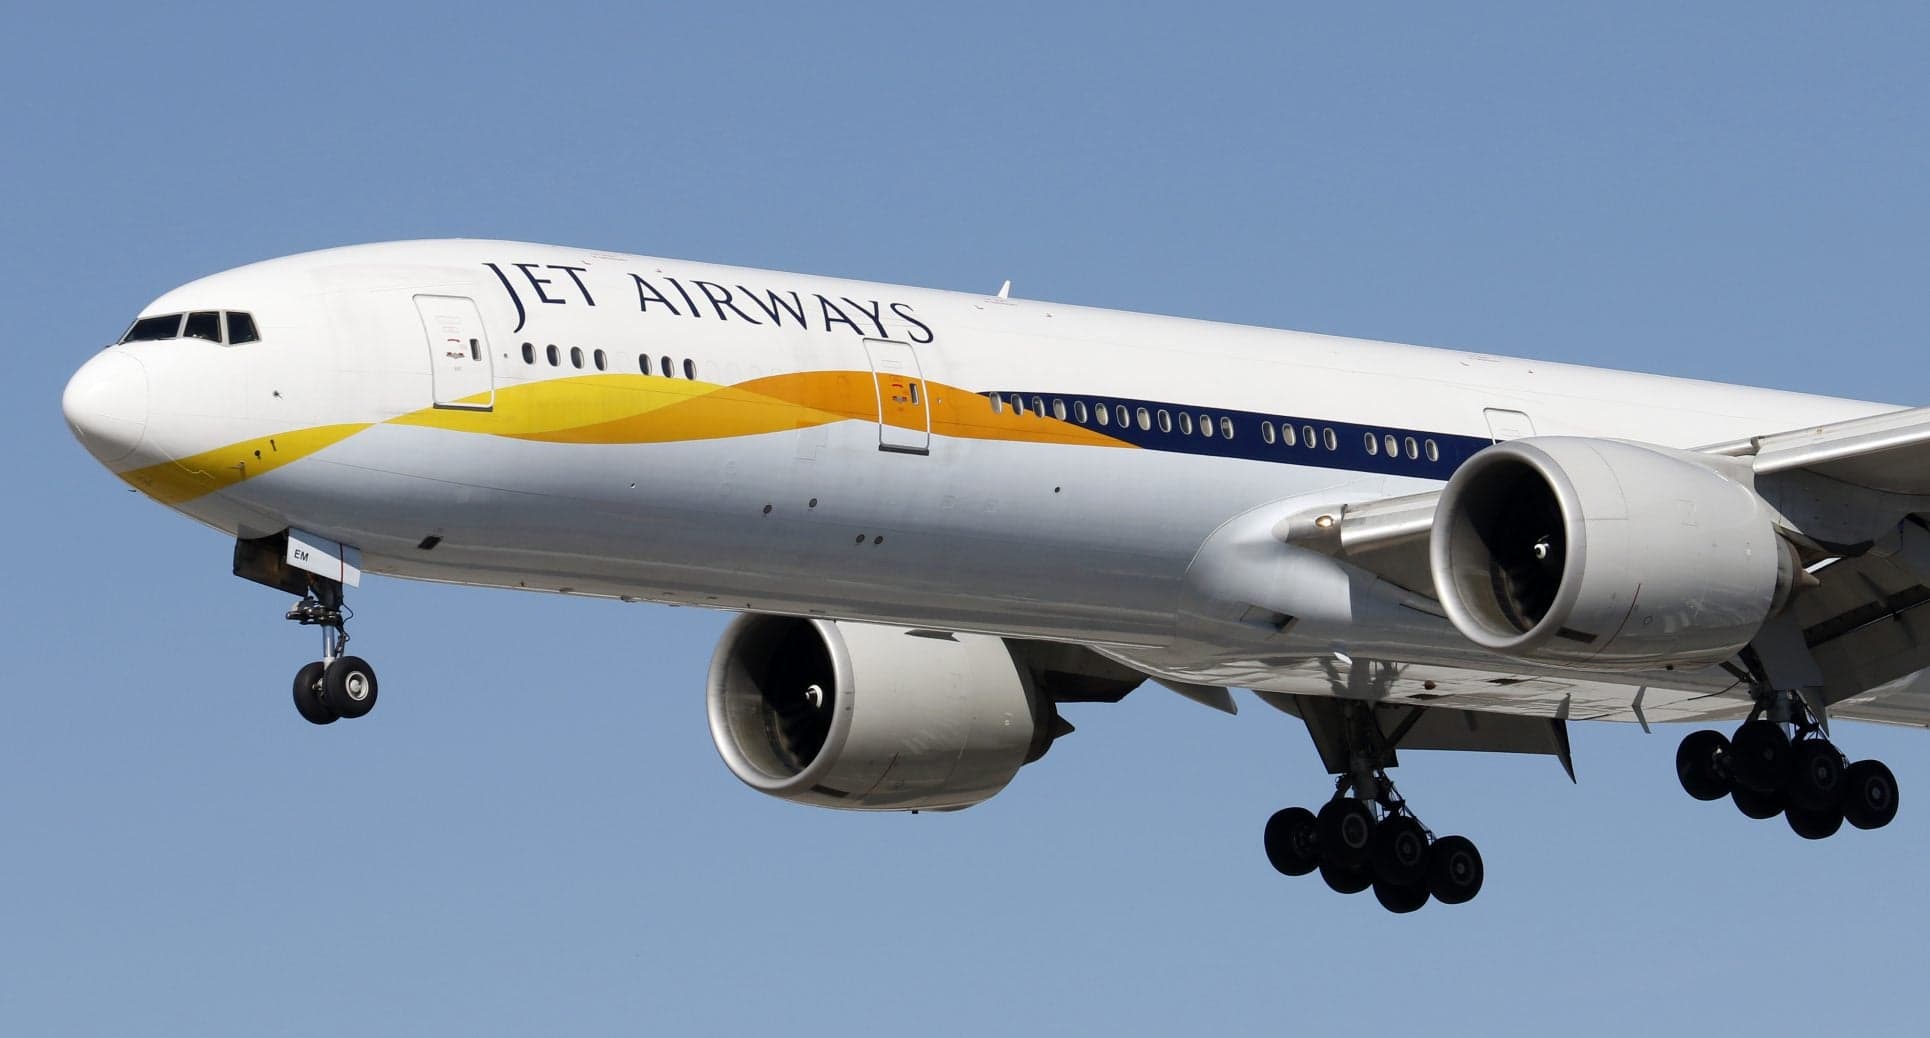 Jet Airways Cockpit Briefly Empties After Pilot and Co-Pilot Fight